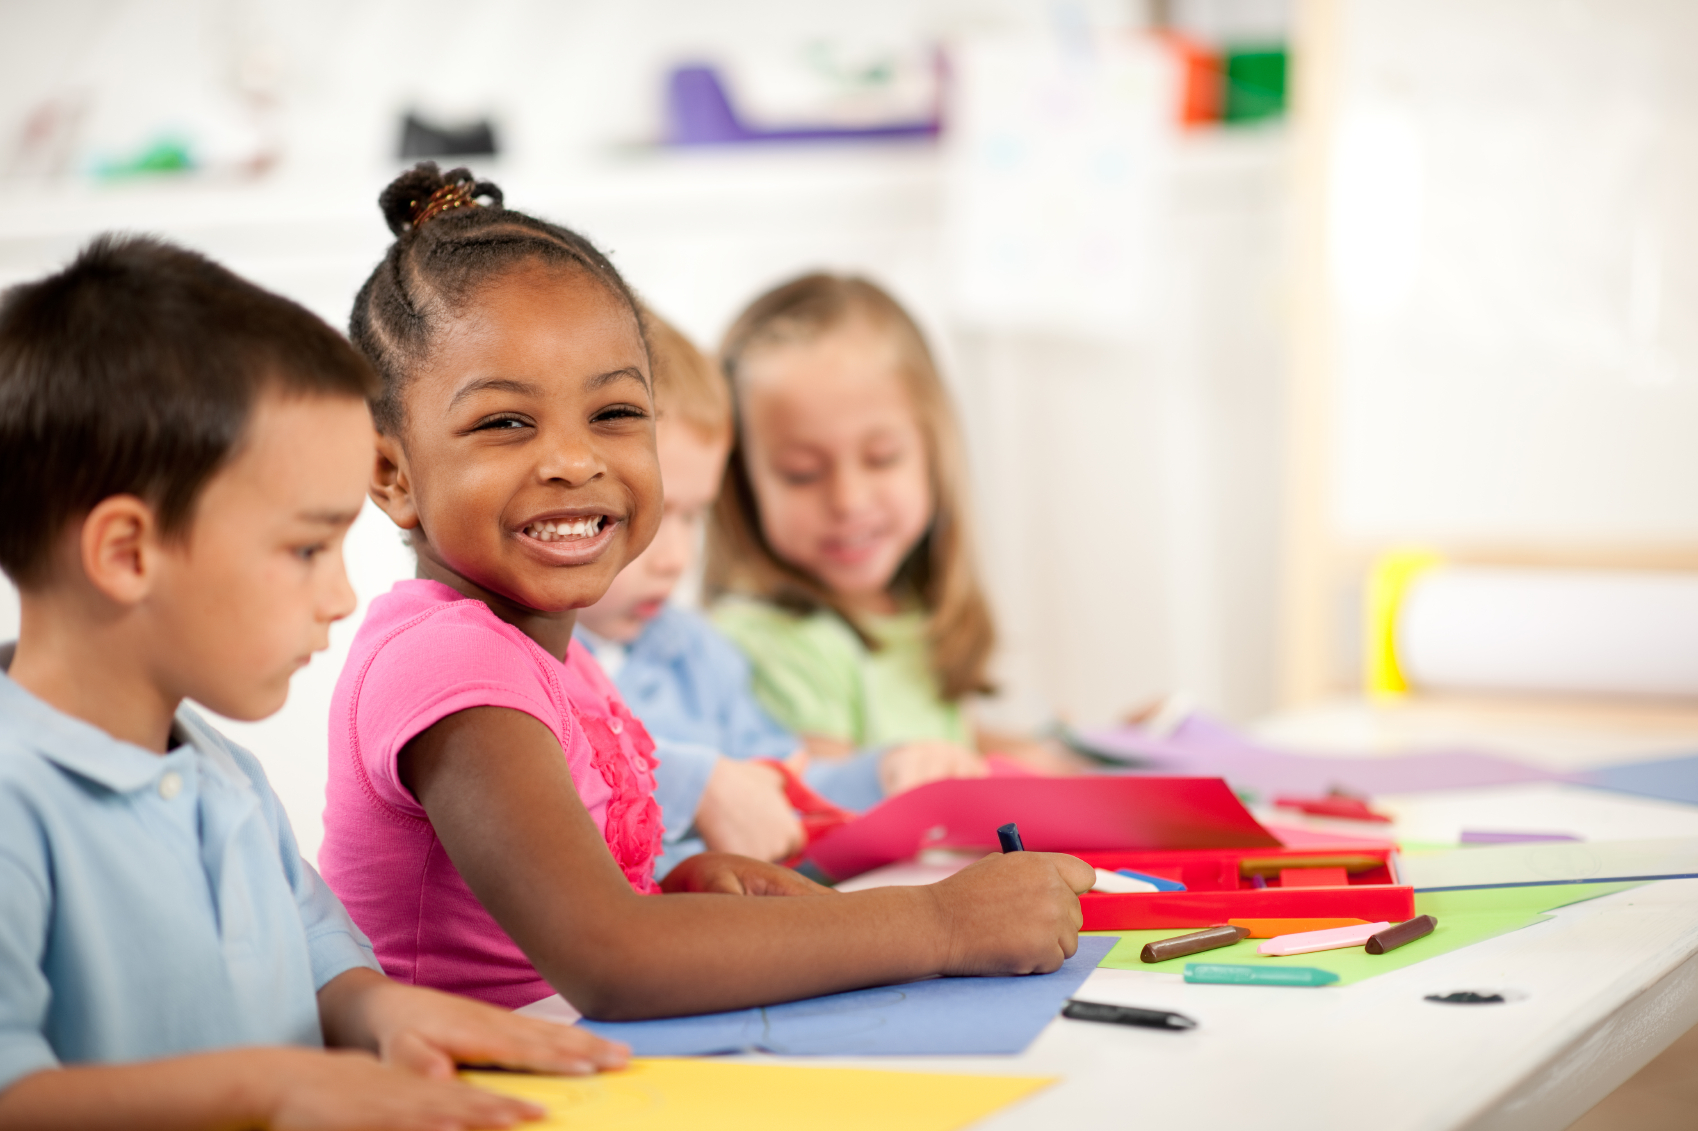 8 Kindergarten Readiness Skills that are More Important than Letter Recognition and Counting